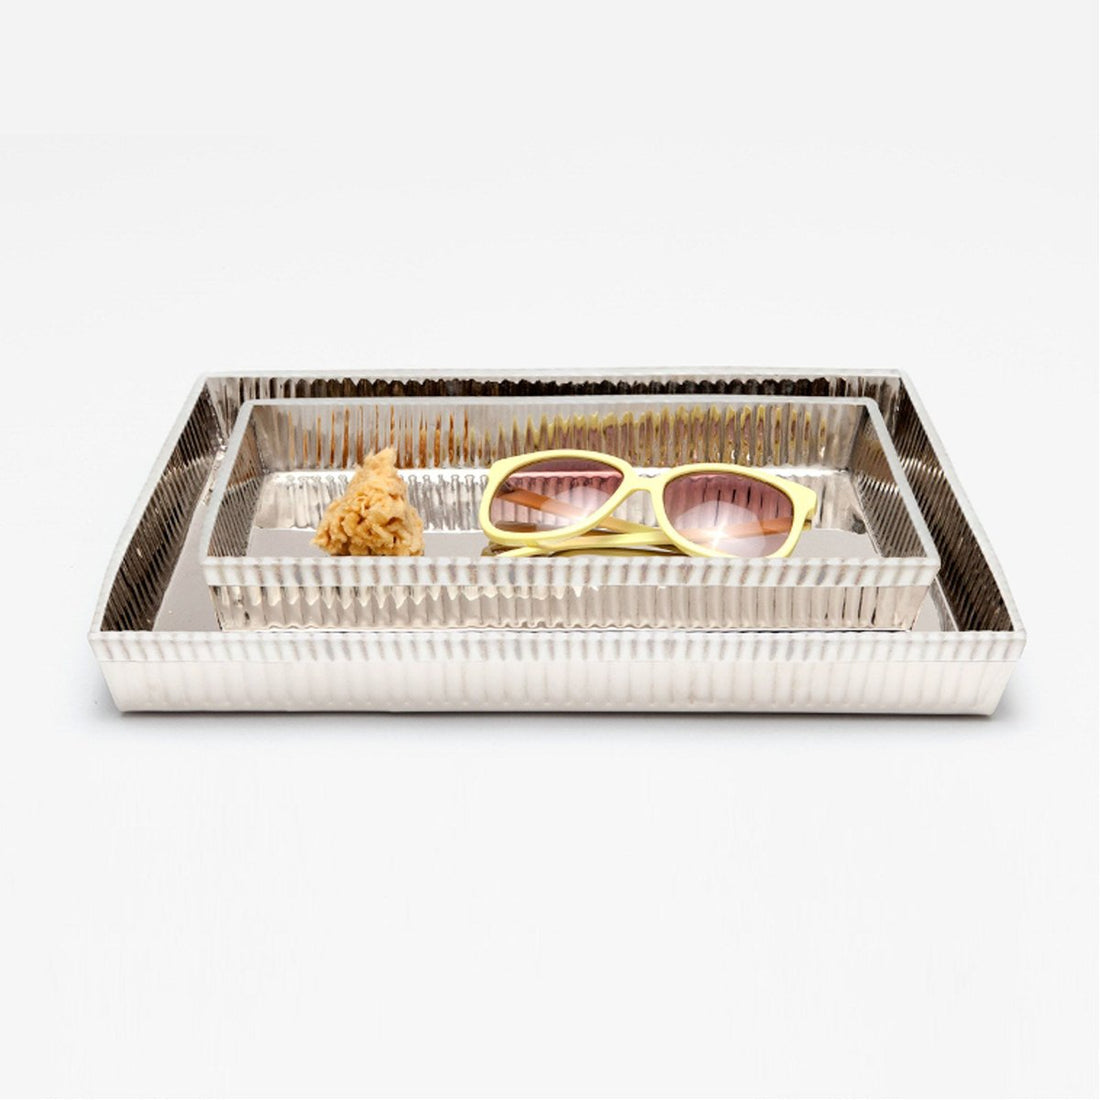 Pigeon and Poodle Redon Rectangular Tray - Tapered, 2-Piece Set